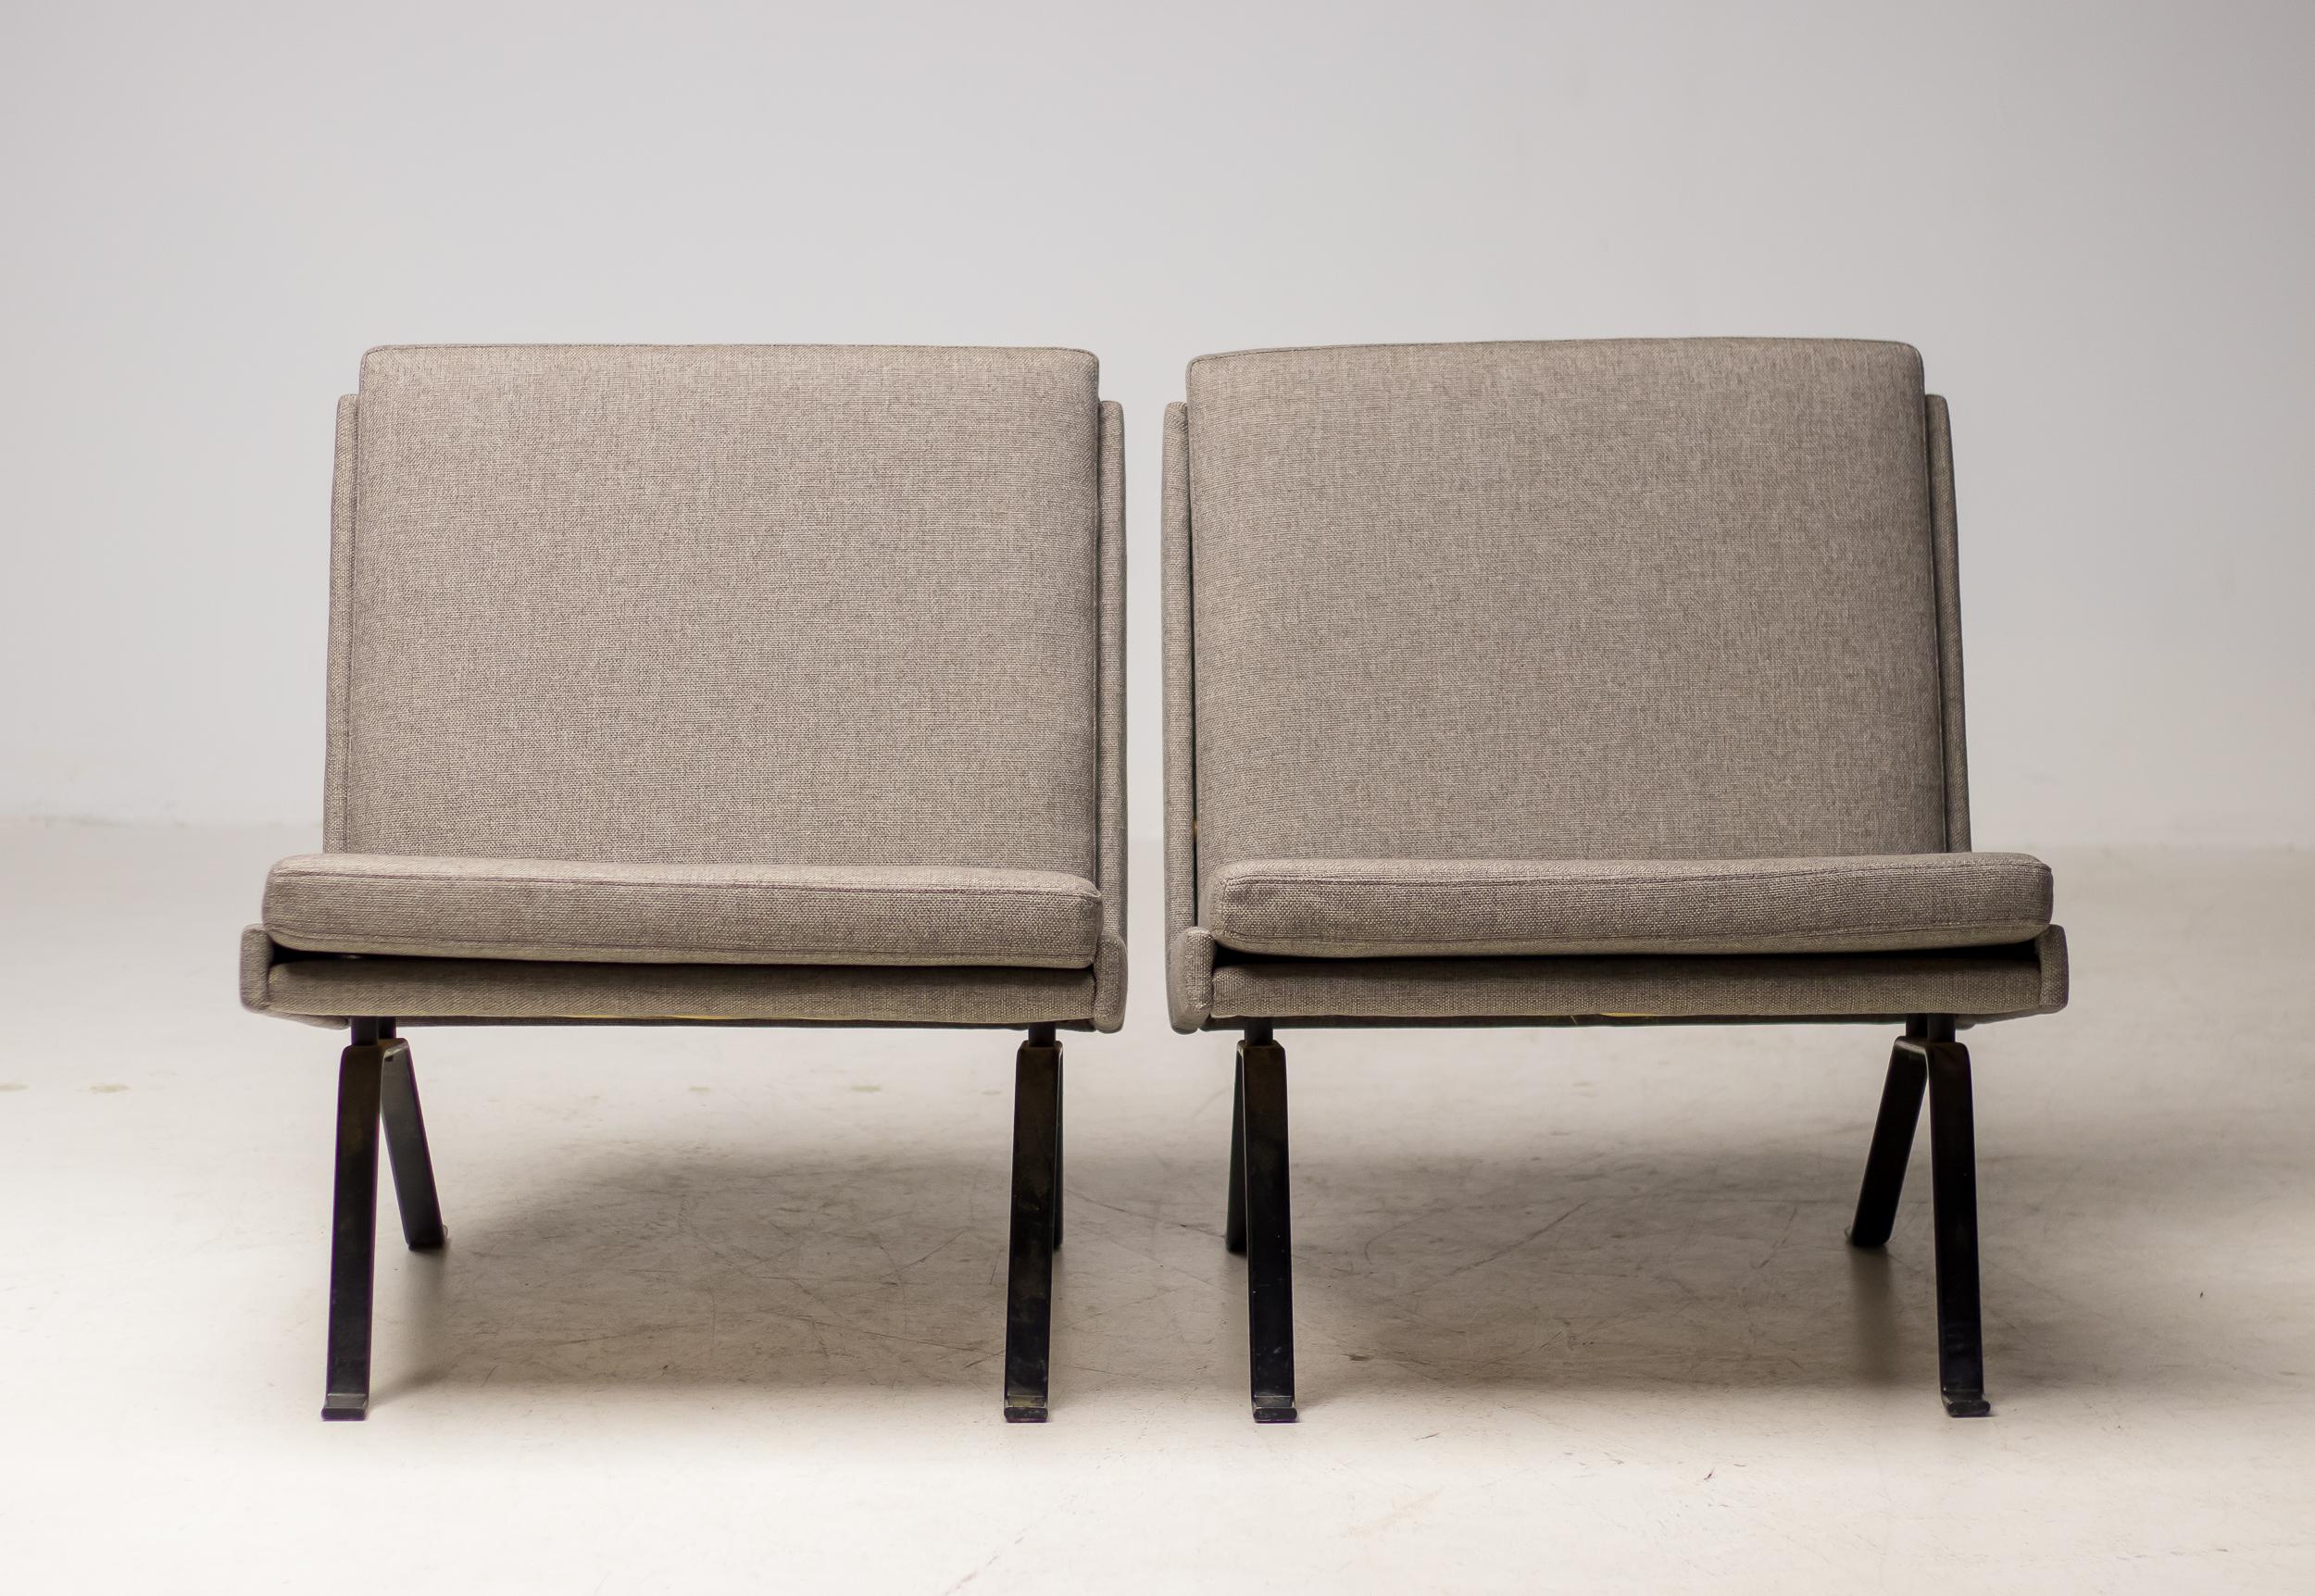 Minimalistic but very comfortable pair of 2 lounge chairs, made in The Netherlands, circa 1960.
The construction is very sophisticated, the chairs seem to float on the pair of flat steel legs.
This strict architectural Dutch design is reminiscent